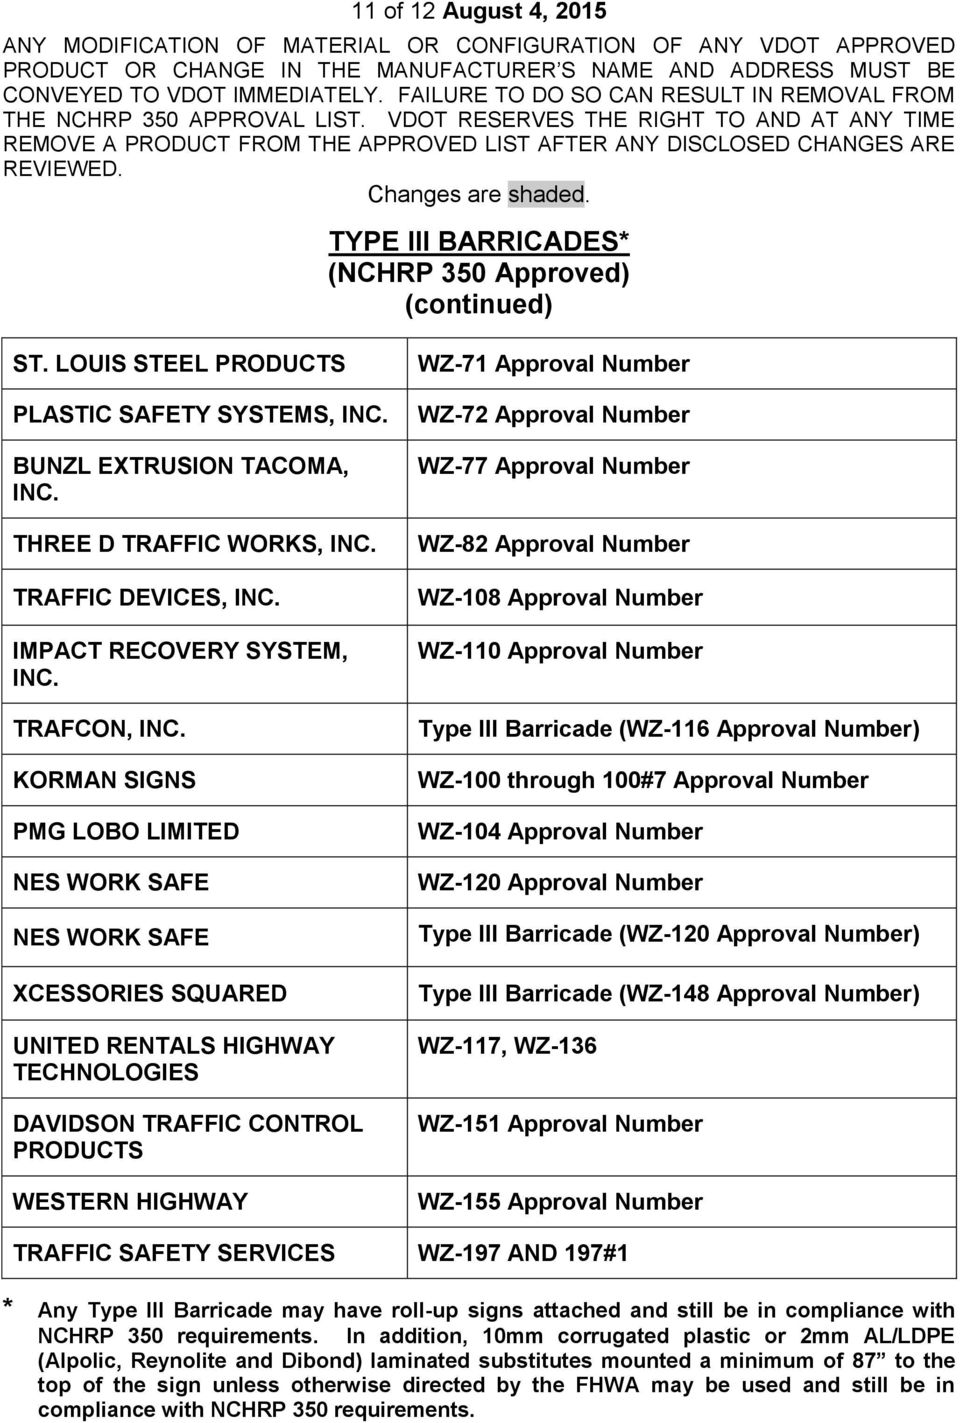 LOUIS STEEL PRODUCTS PLASTIC SAFETY SYSTEMS, INC. BUNZL EXTRUSION TACOMA, INC. THREE D TRAFFIC WORKS, INC. TRAFFIC DEVICES, INC. IMPACT RECOVERY SYSTEM, INC. TRAFCON, INC.